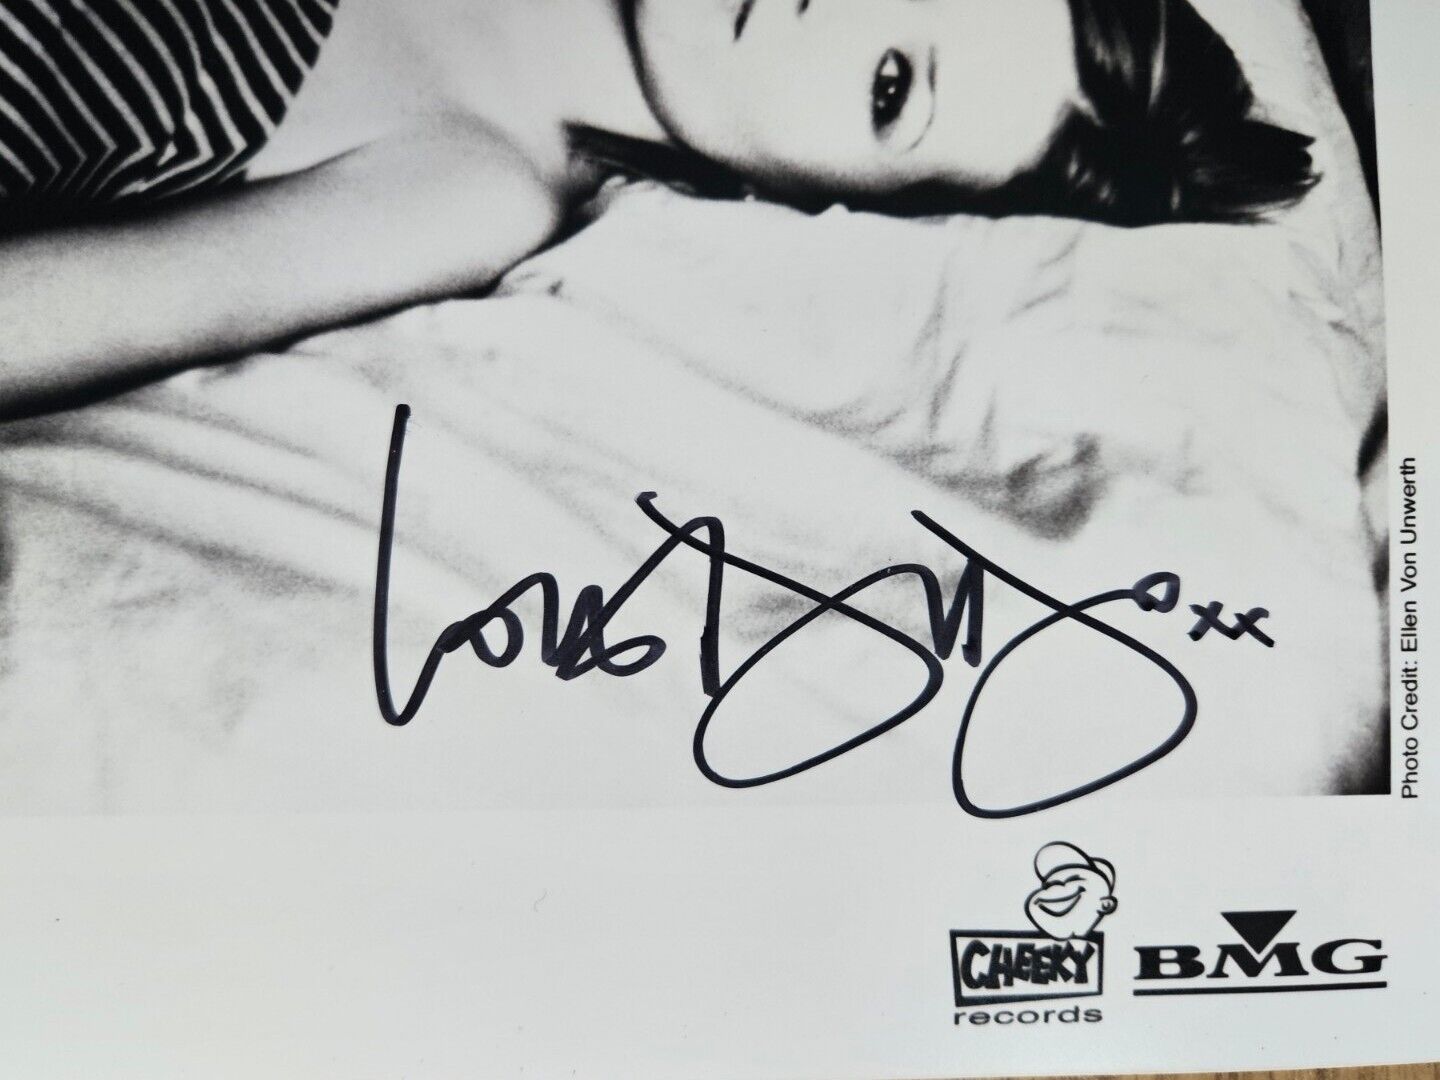 EARLY DIDO HAND SIGNED PROMO PHOTO 10x8 PHOTO AUTOGRAPH GENUINE 